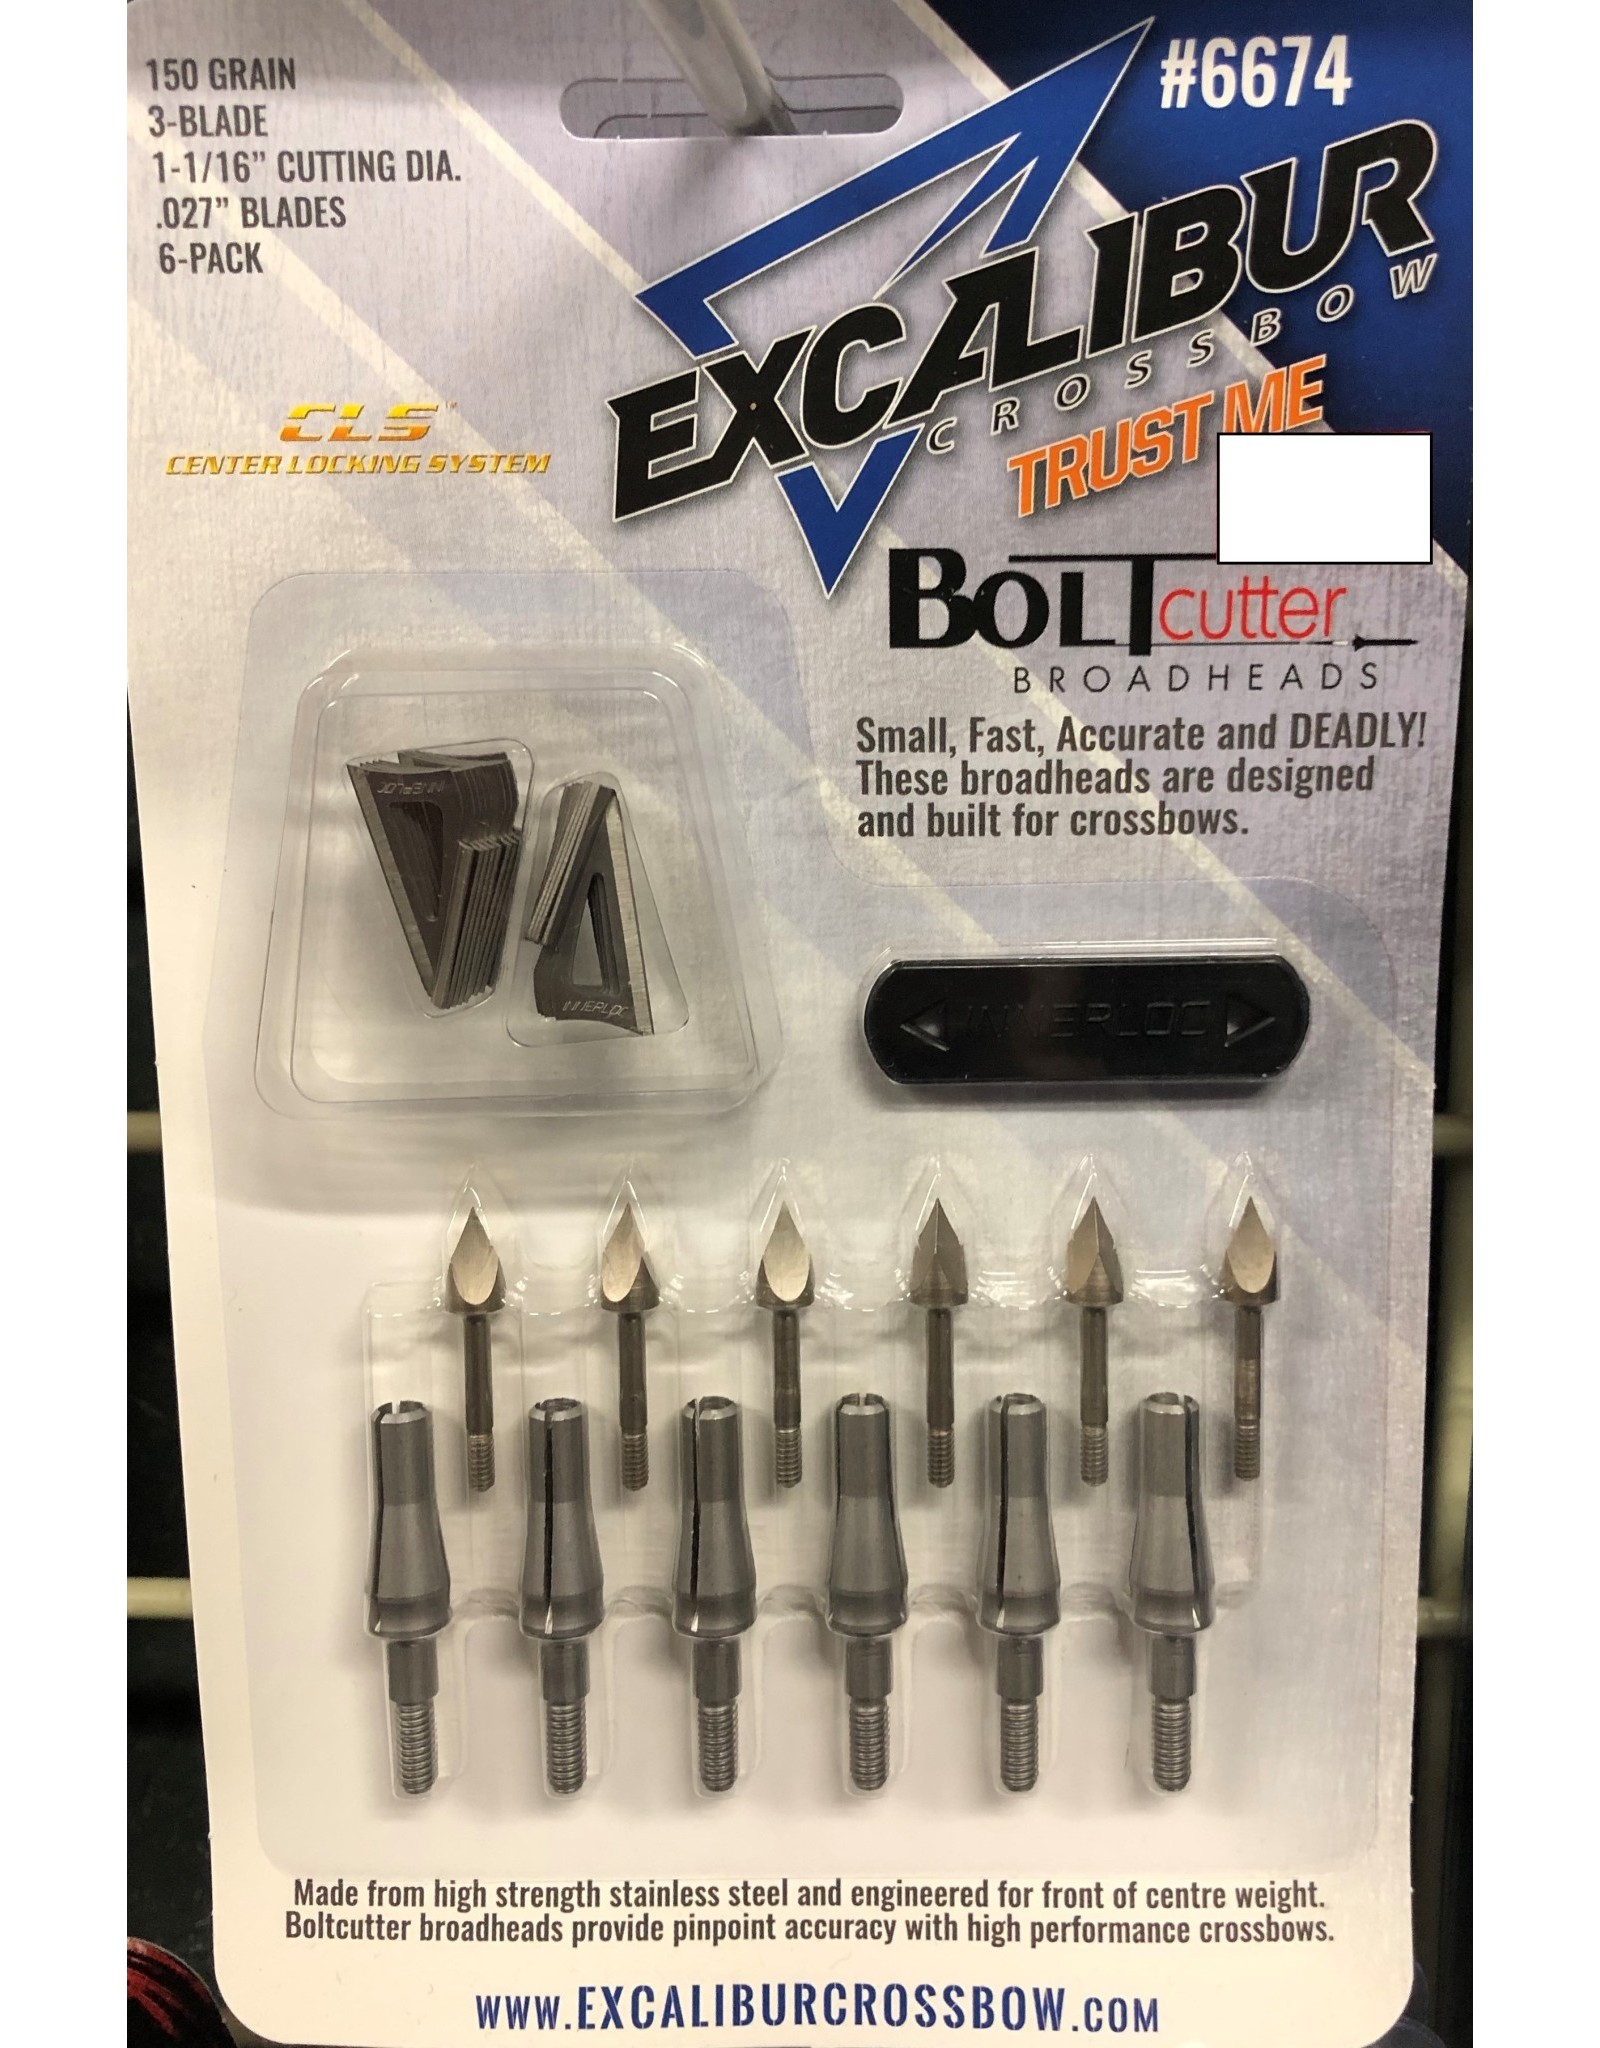 Excalibur Crossbows EXCALIBUR CROSSBOW BOLTCUTTER BROADHEADS -150 gr. (6 pk)